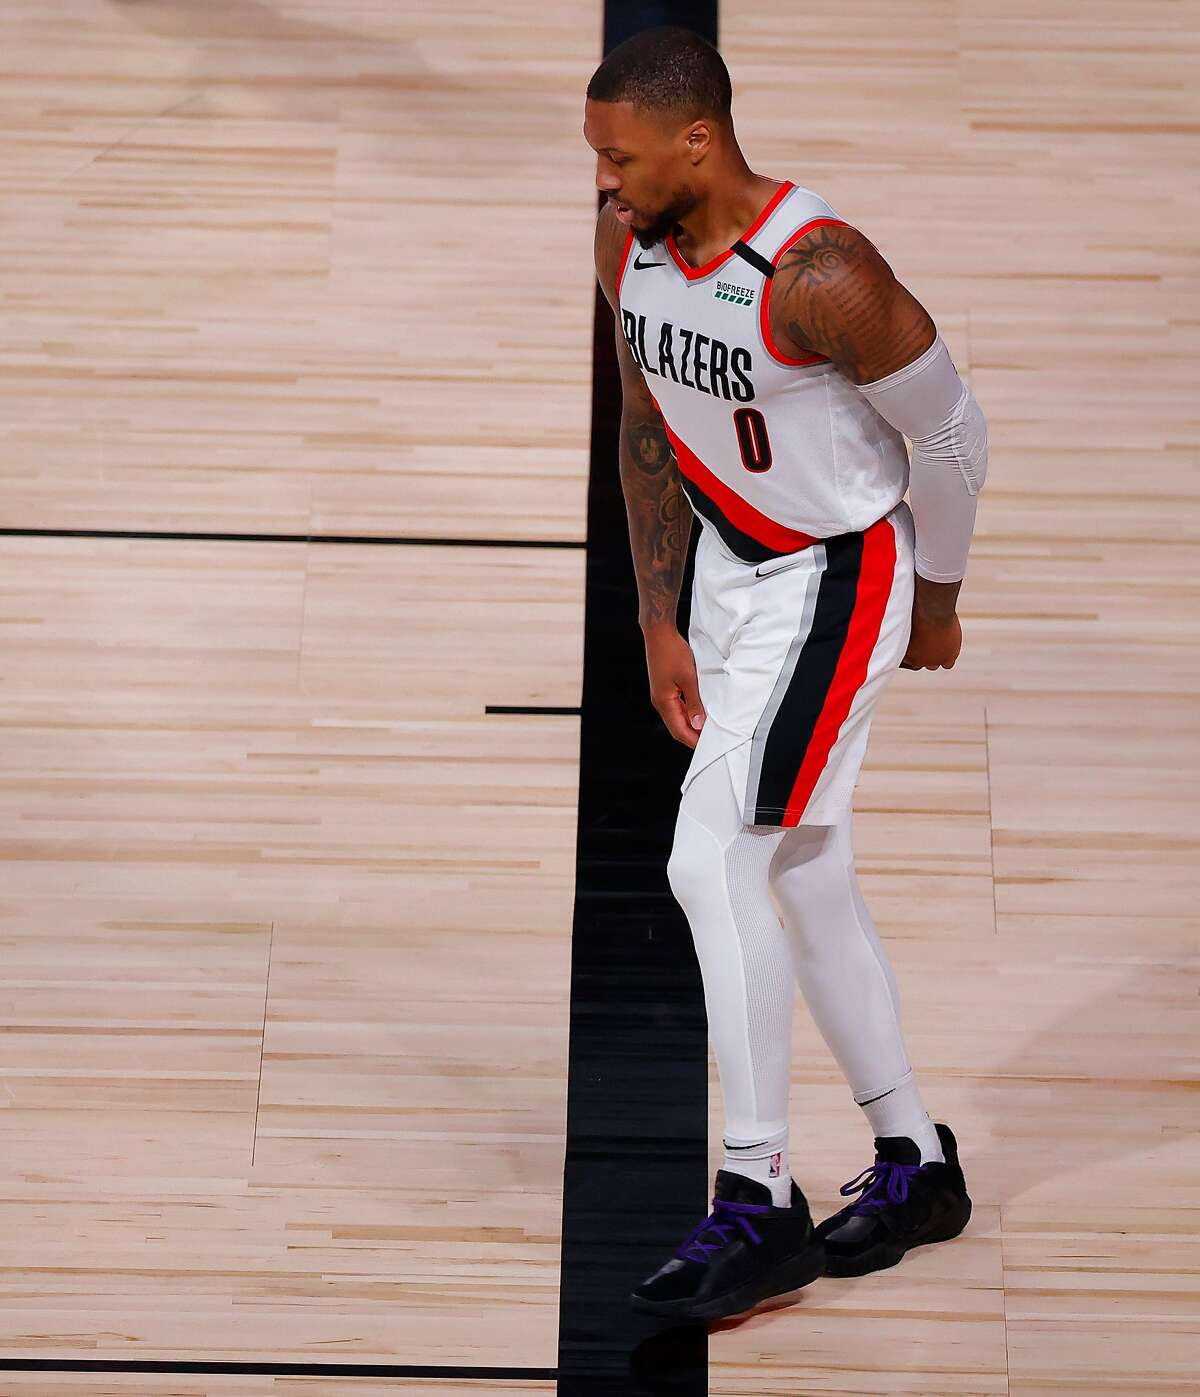 LAKE BUENA VISTA, FLORIDA - AUGUST 24: Damian Lillard #0 of the Portland Trail Blazers limps after drawing a foul against the Los Angeles Lakers during the third quarter in Game Four of the Western Conference First Round during the 2020 NBA Playoffs at AdventHealth Arena at ESPN Wide World Of Sports Complex on August 24, 2020 in Lake Buena Vista, Florida. NOTE TO USER: User expressly acknowledges and agrees that, by downloading and or using this photograph, User is consenting to the terms and conditions of the Getty Images License Agreement. (Photo by Kevin C. Cox/Getty Images)